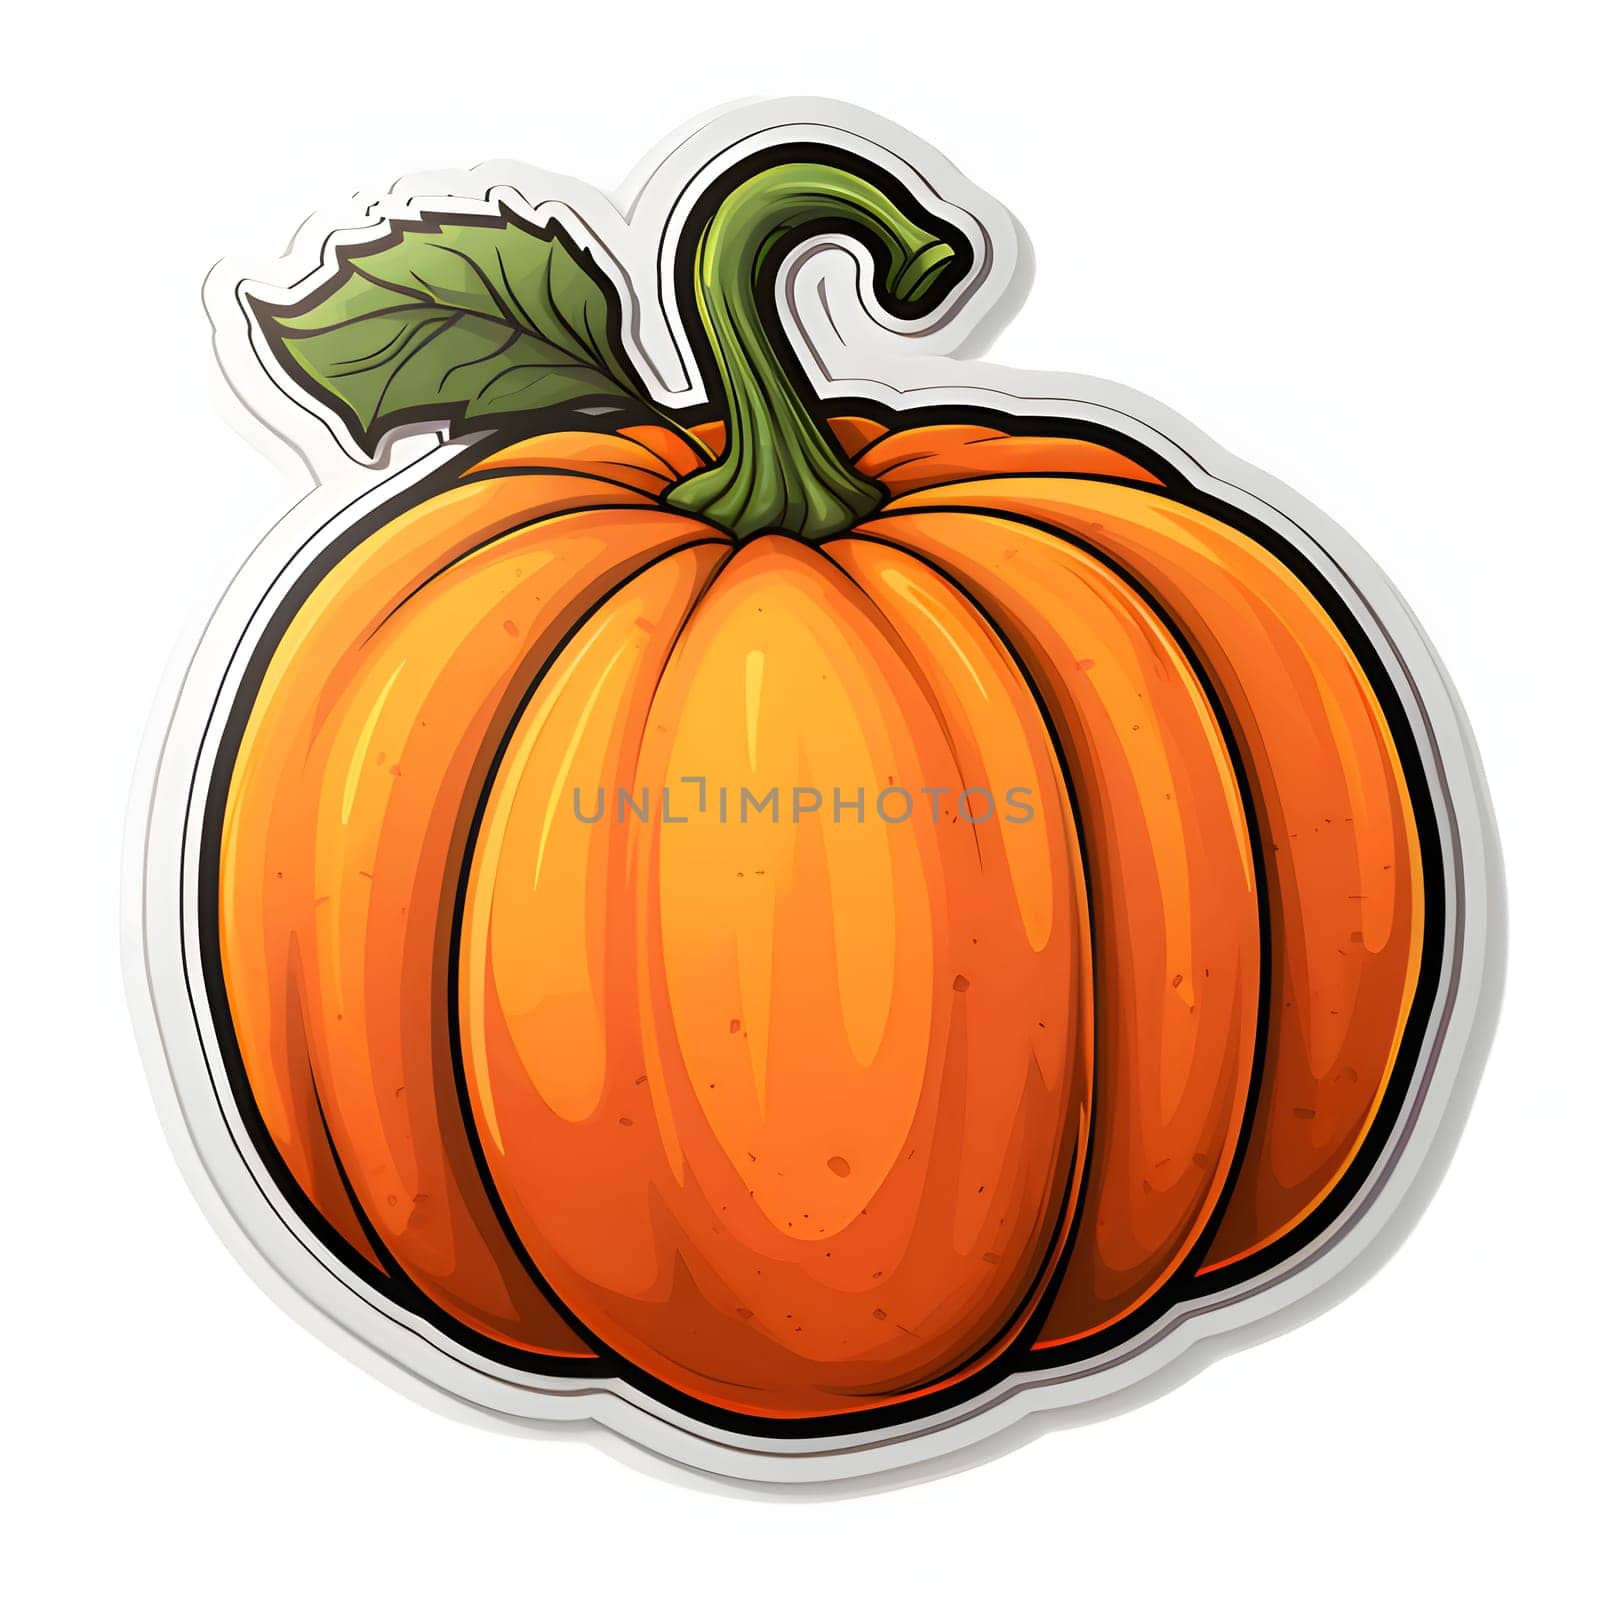 Sticker pumpkin with leaf. Pumpkin as a dish of thanksgiving for the harvest, picture on a white isolated background. by ThemesS